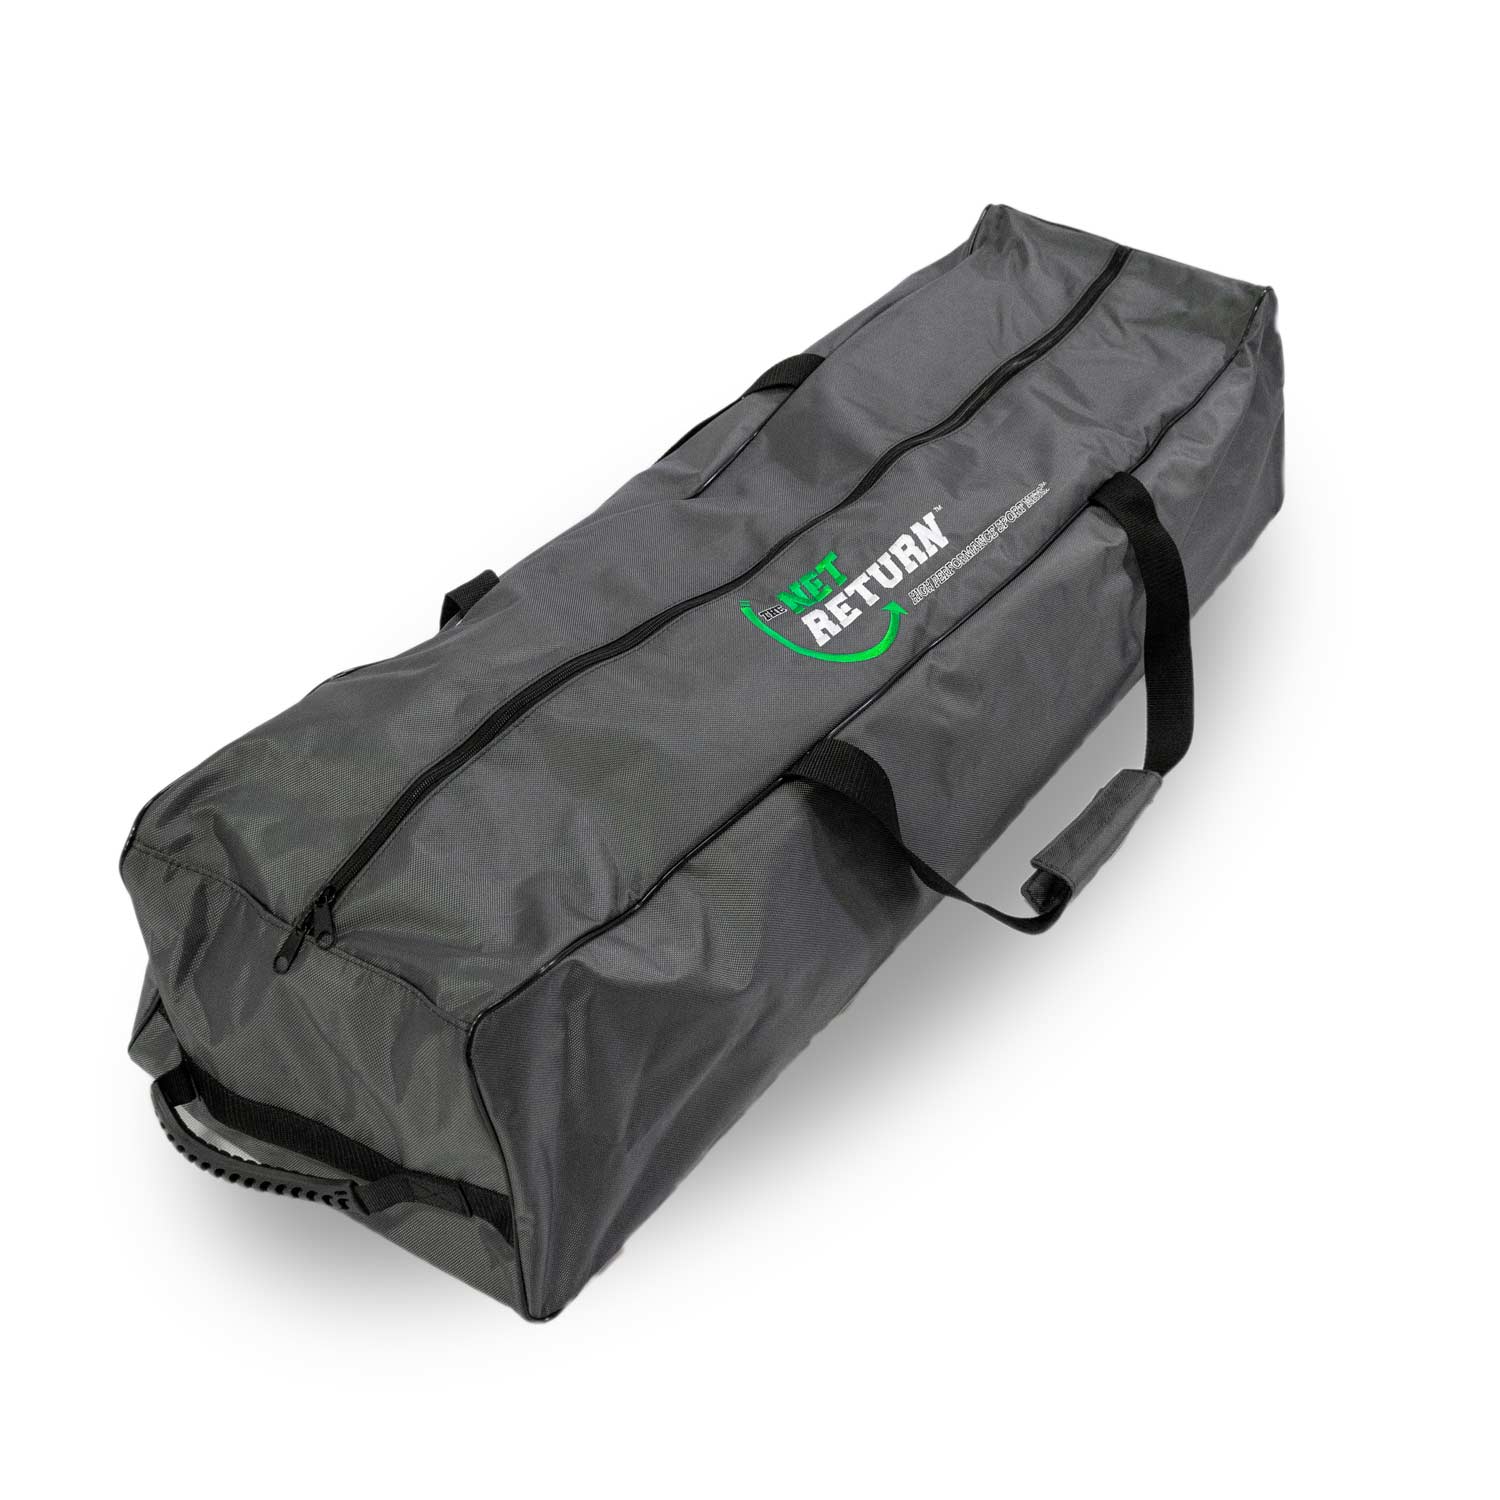 Pro on the Go Duffle Bag